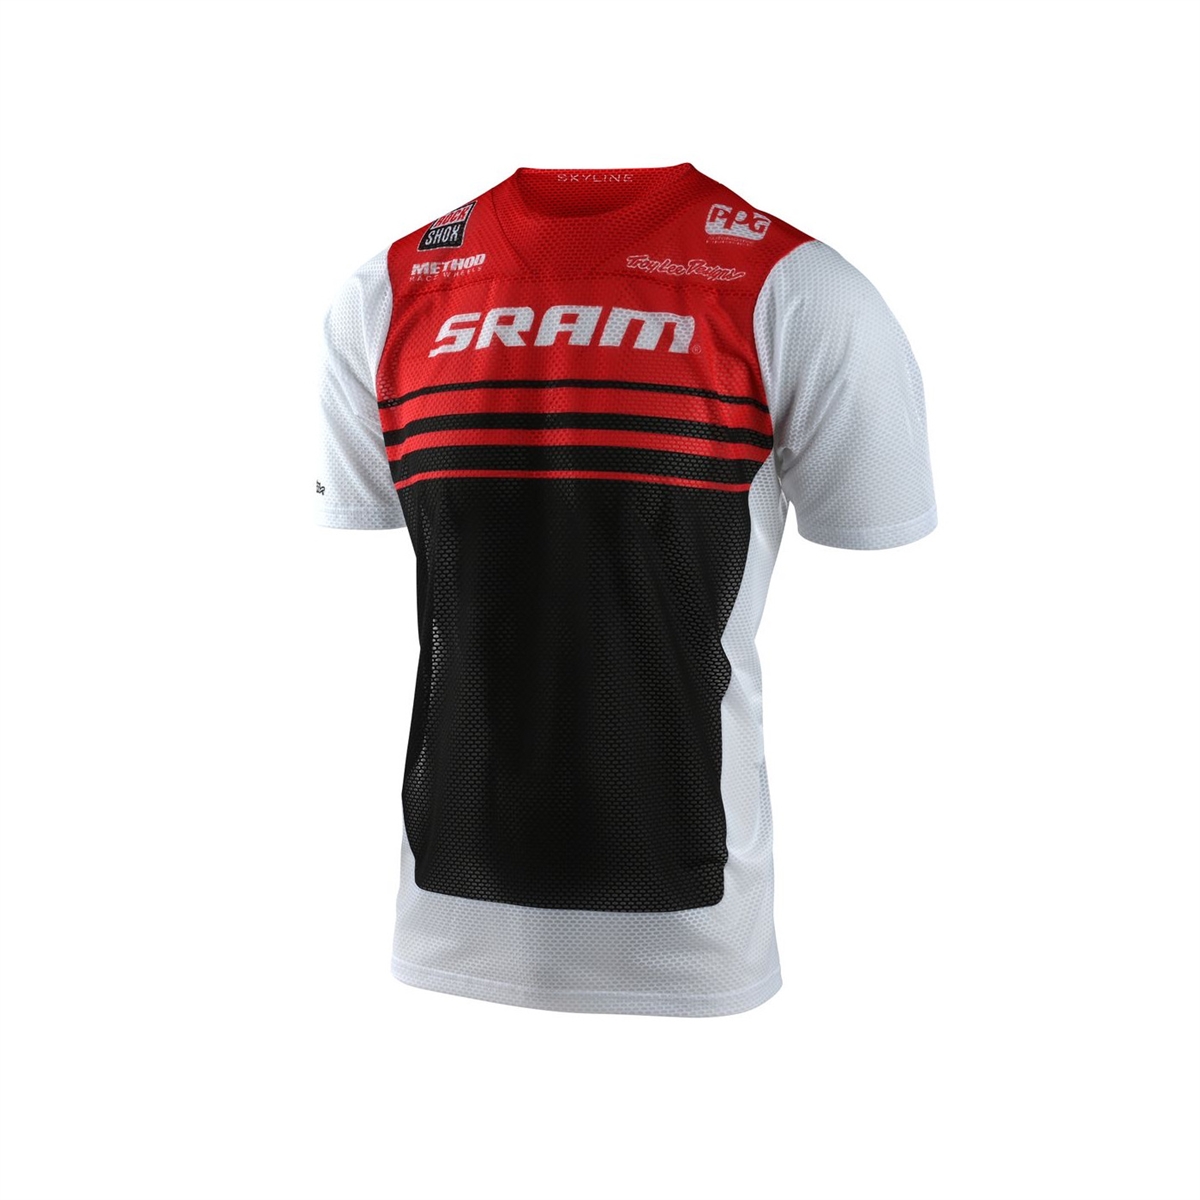 Maillot Skyline Air Sram Manches Courtes Noir/Rouge Taille M